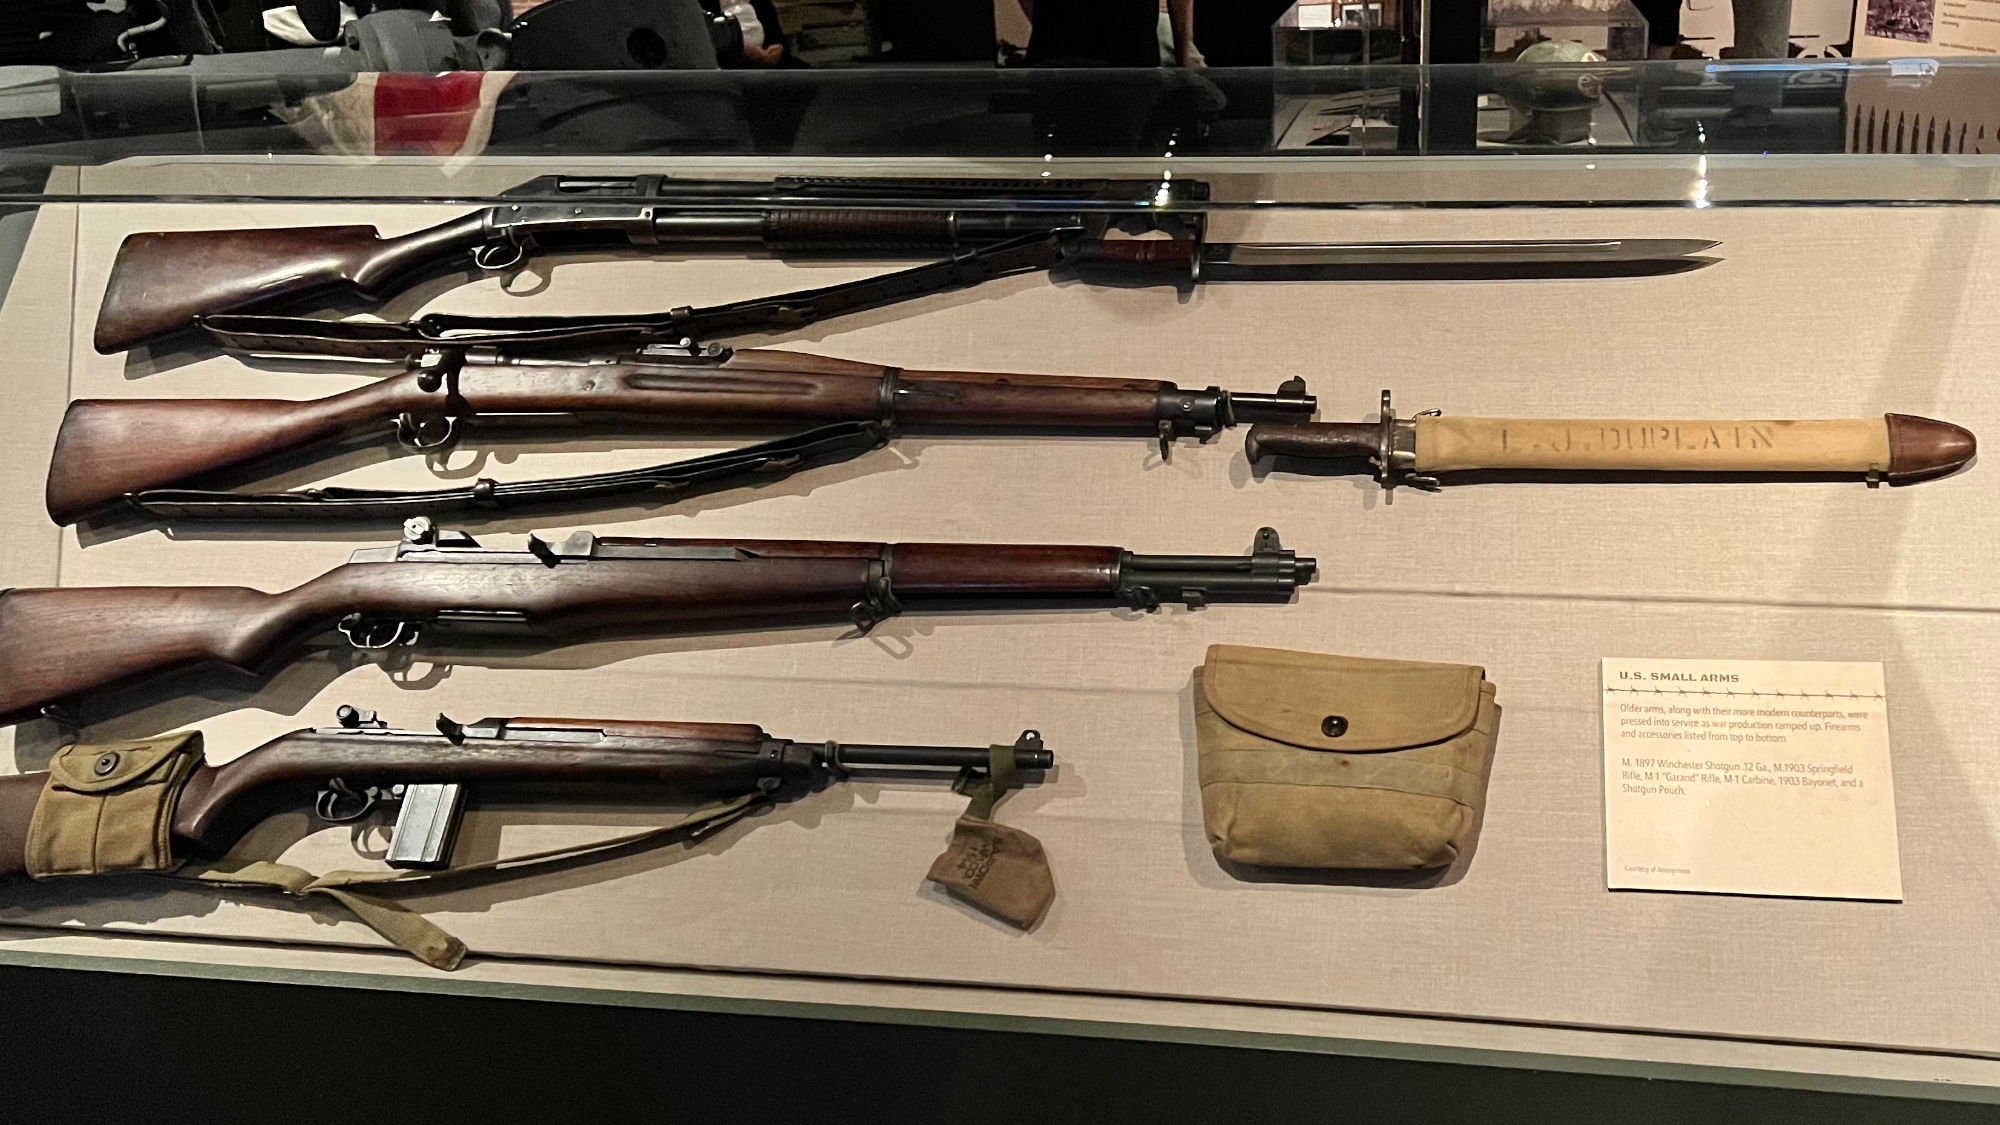 WWII US Small Arms